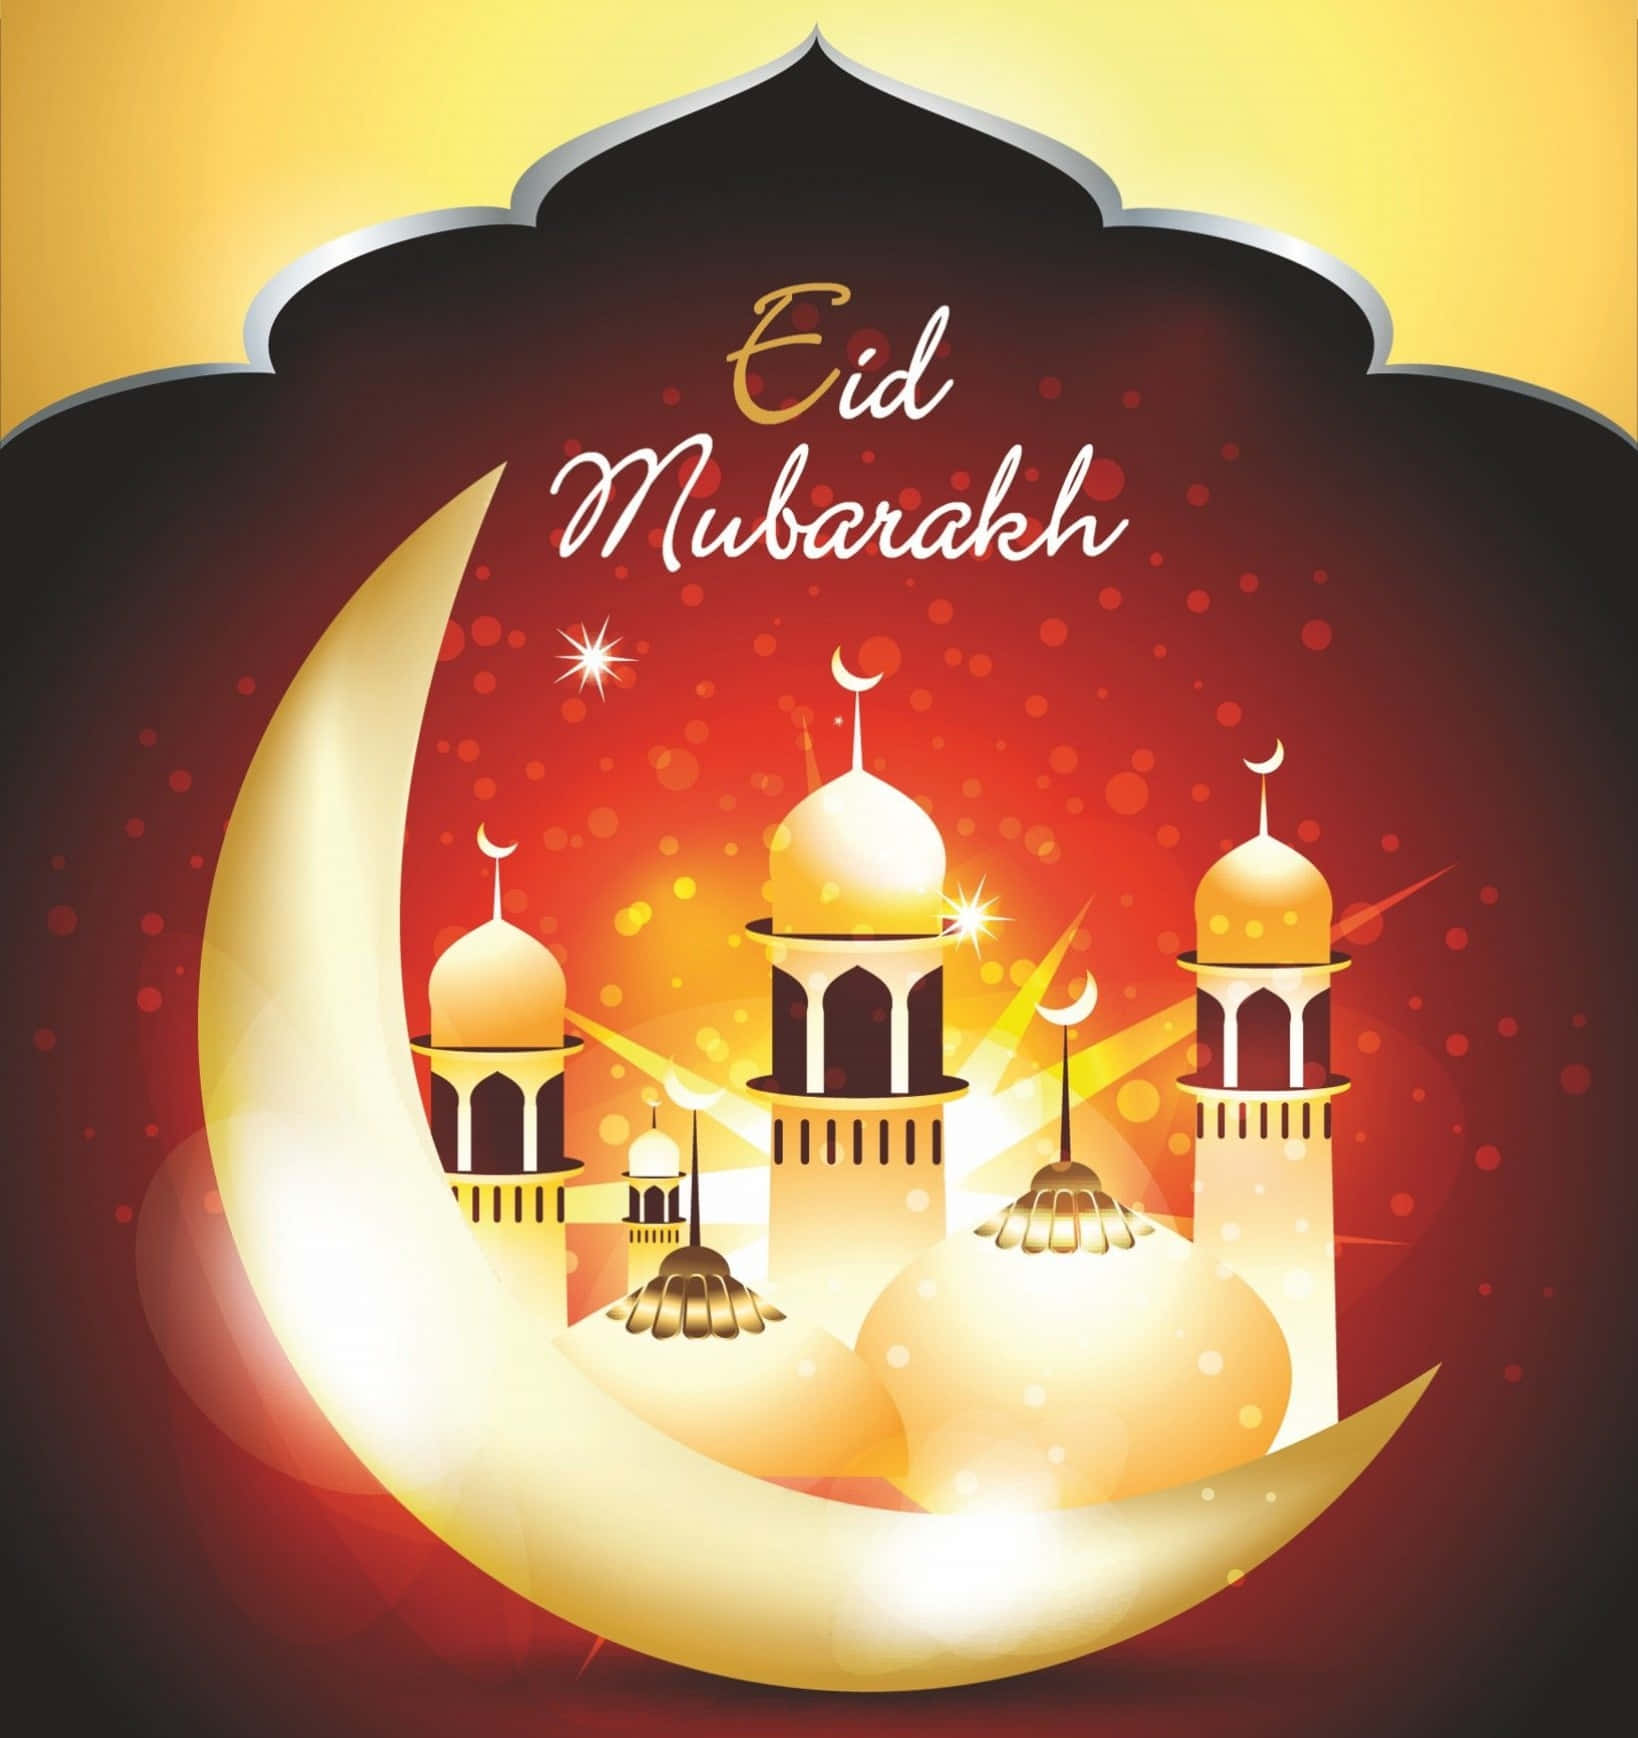 Celebrate Eid Mubarak with your loved ones.